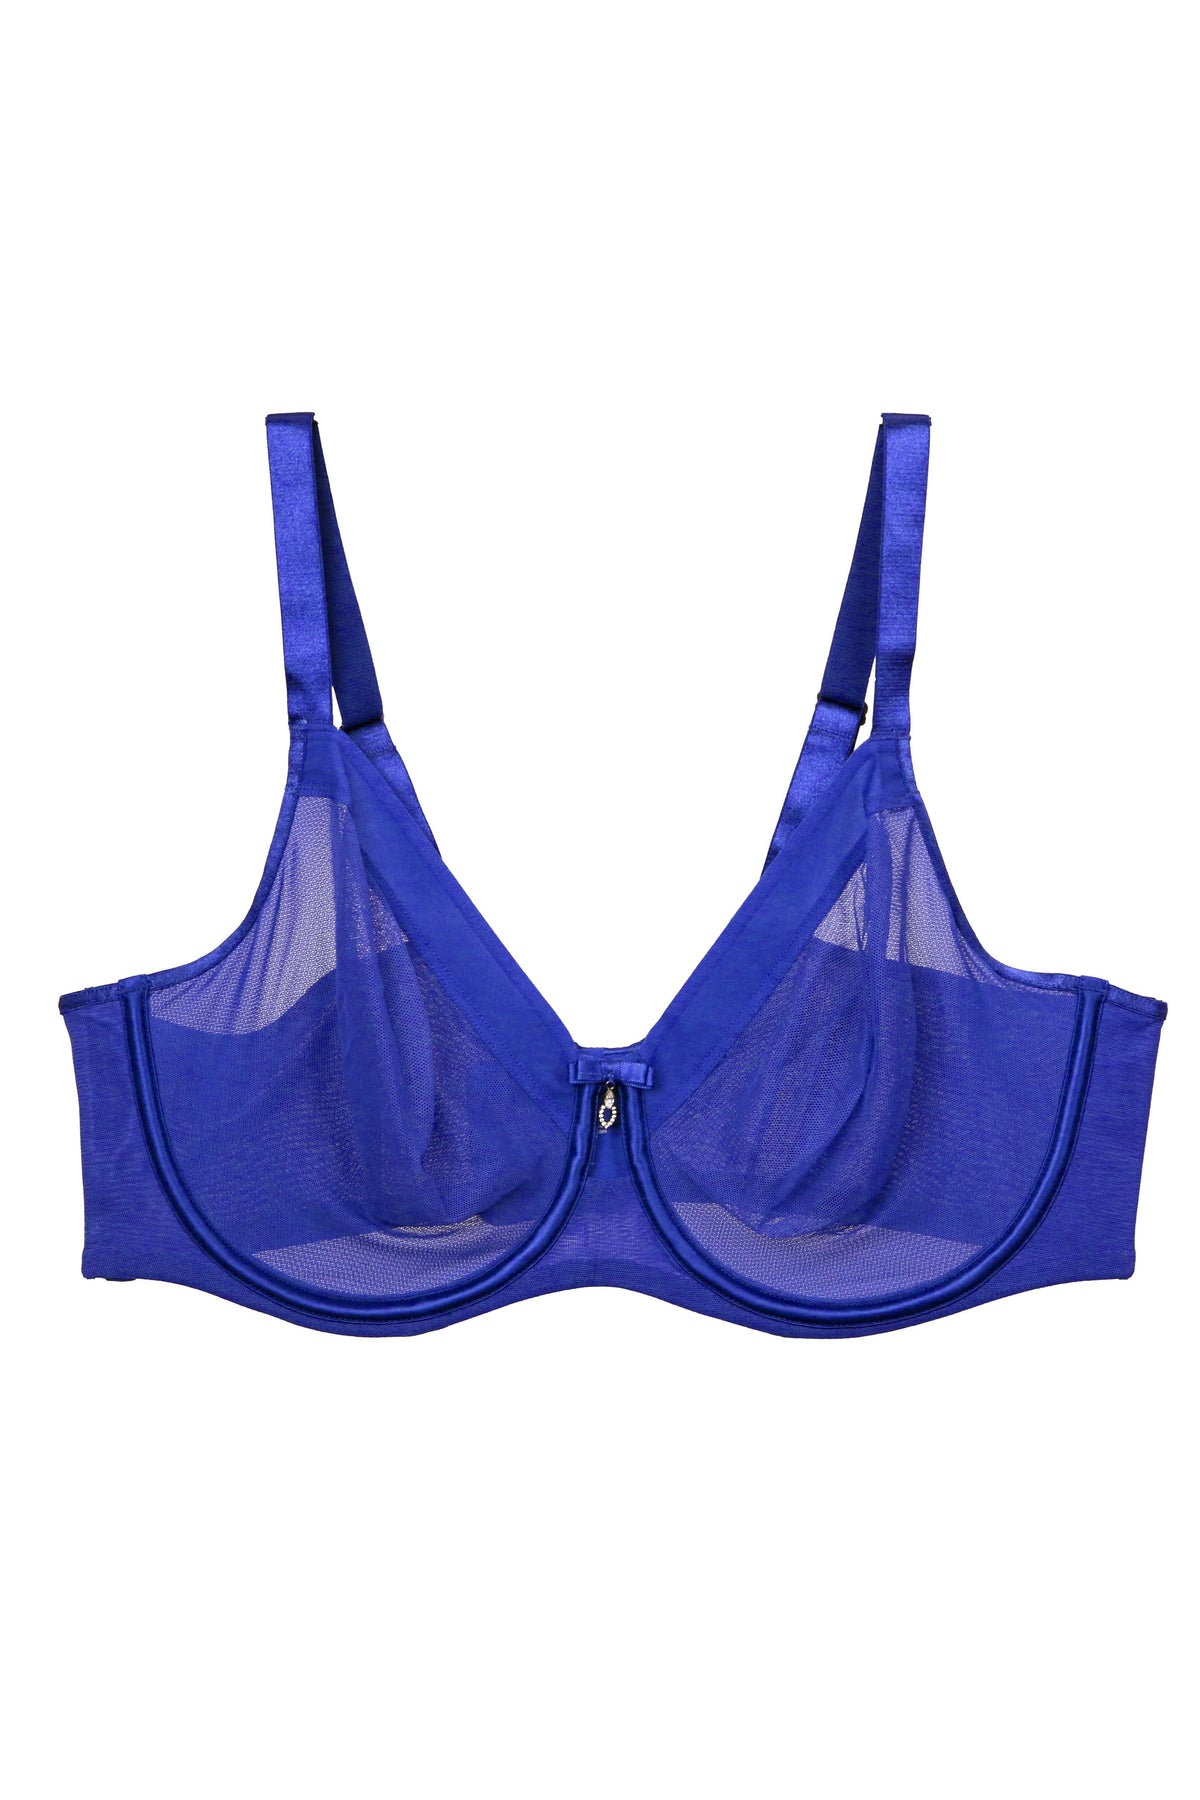 Curvy Couture Plunge Sheer Mesh Unlined Underwire Bra - Blue